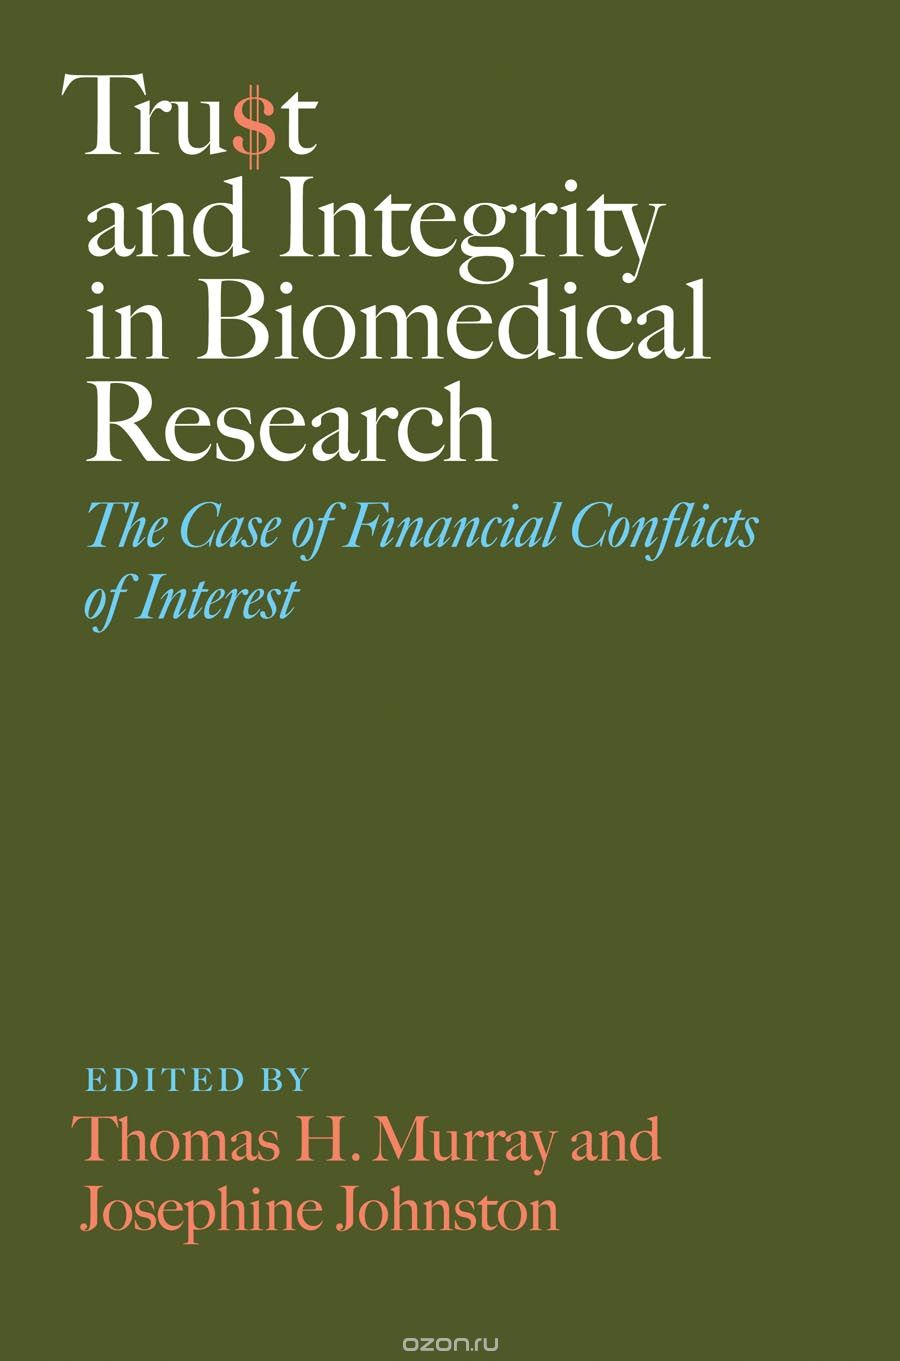 Скачать книгу "Trust and Integrity in Biomedical Research – The Case of Financial Conflicts of Interest"